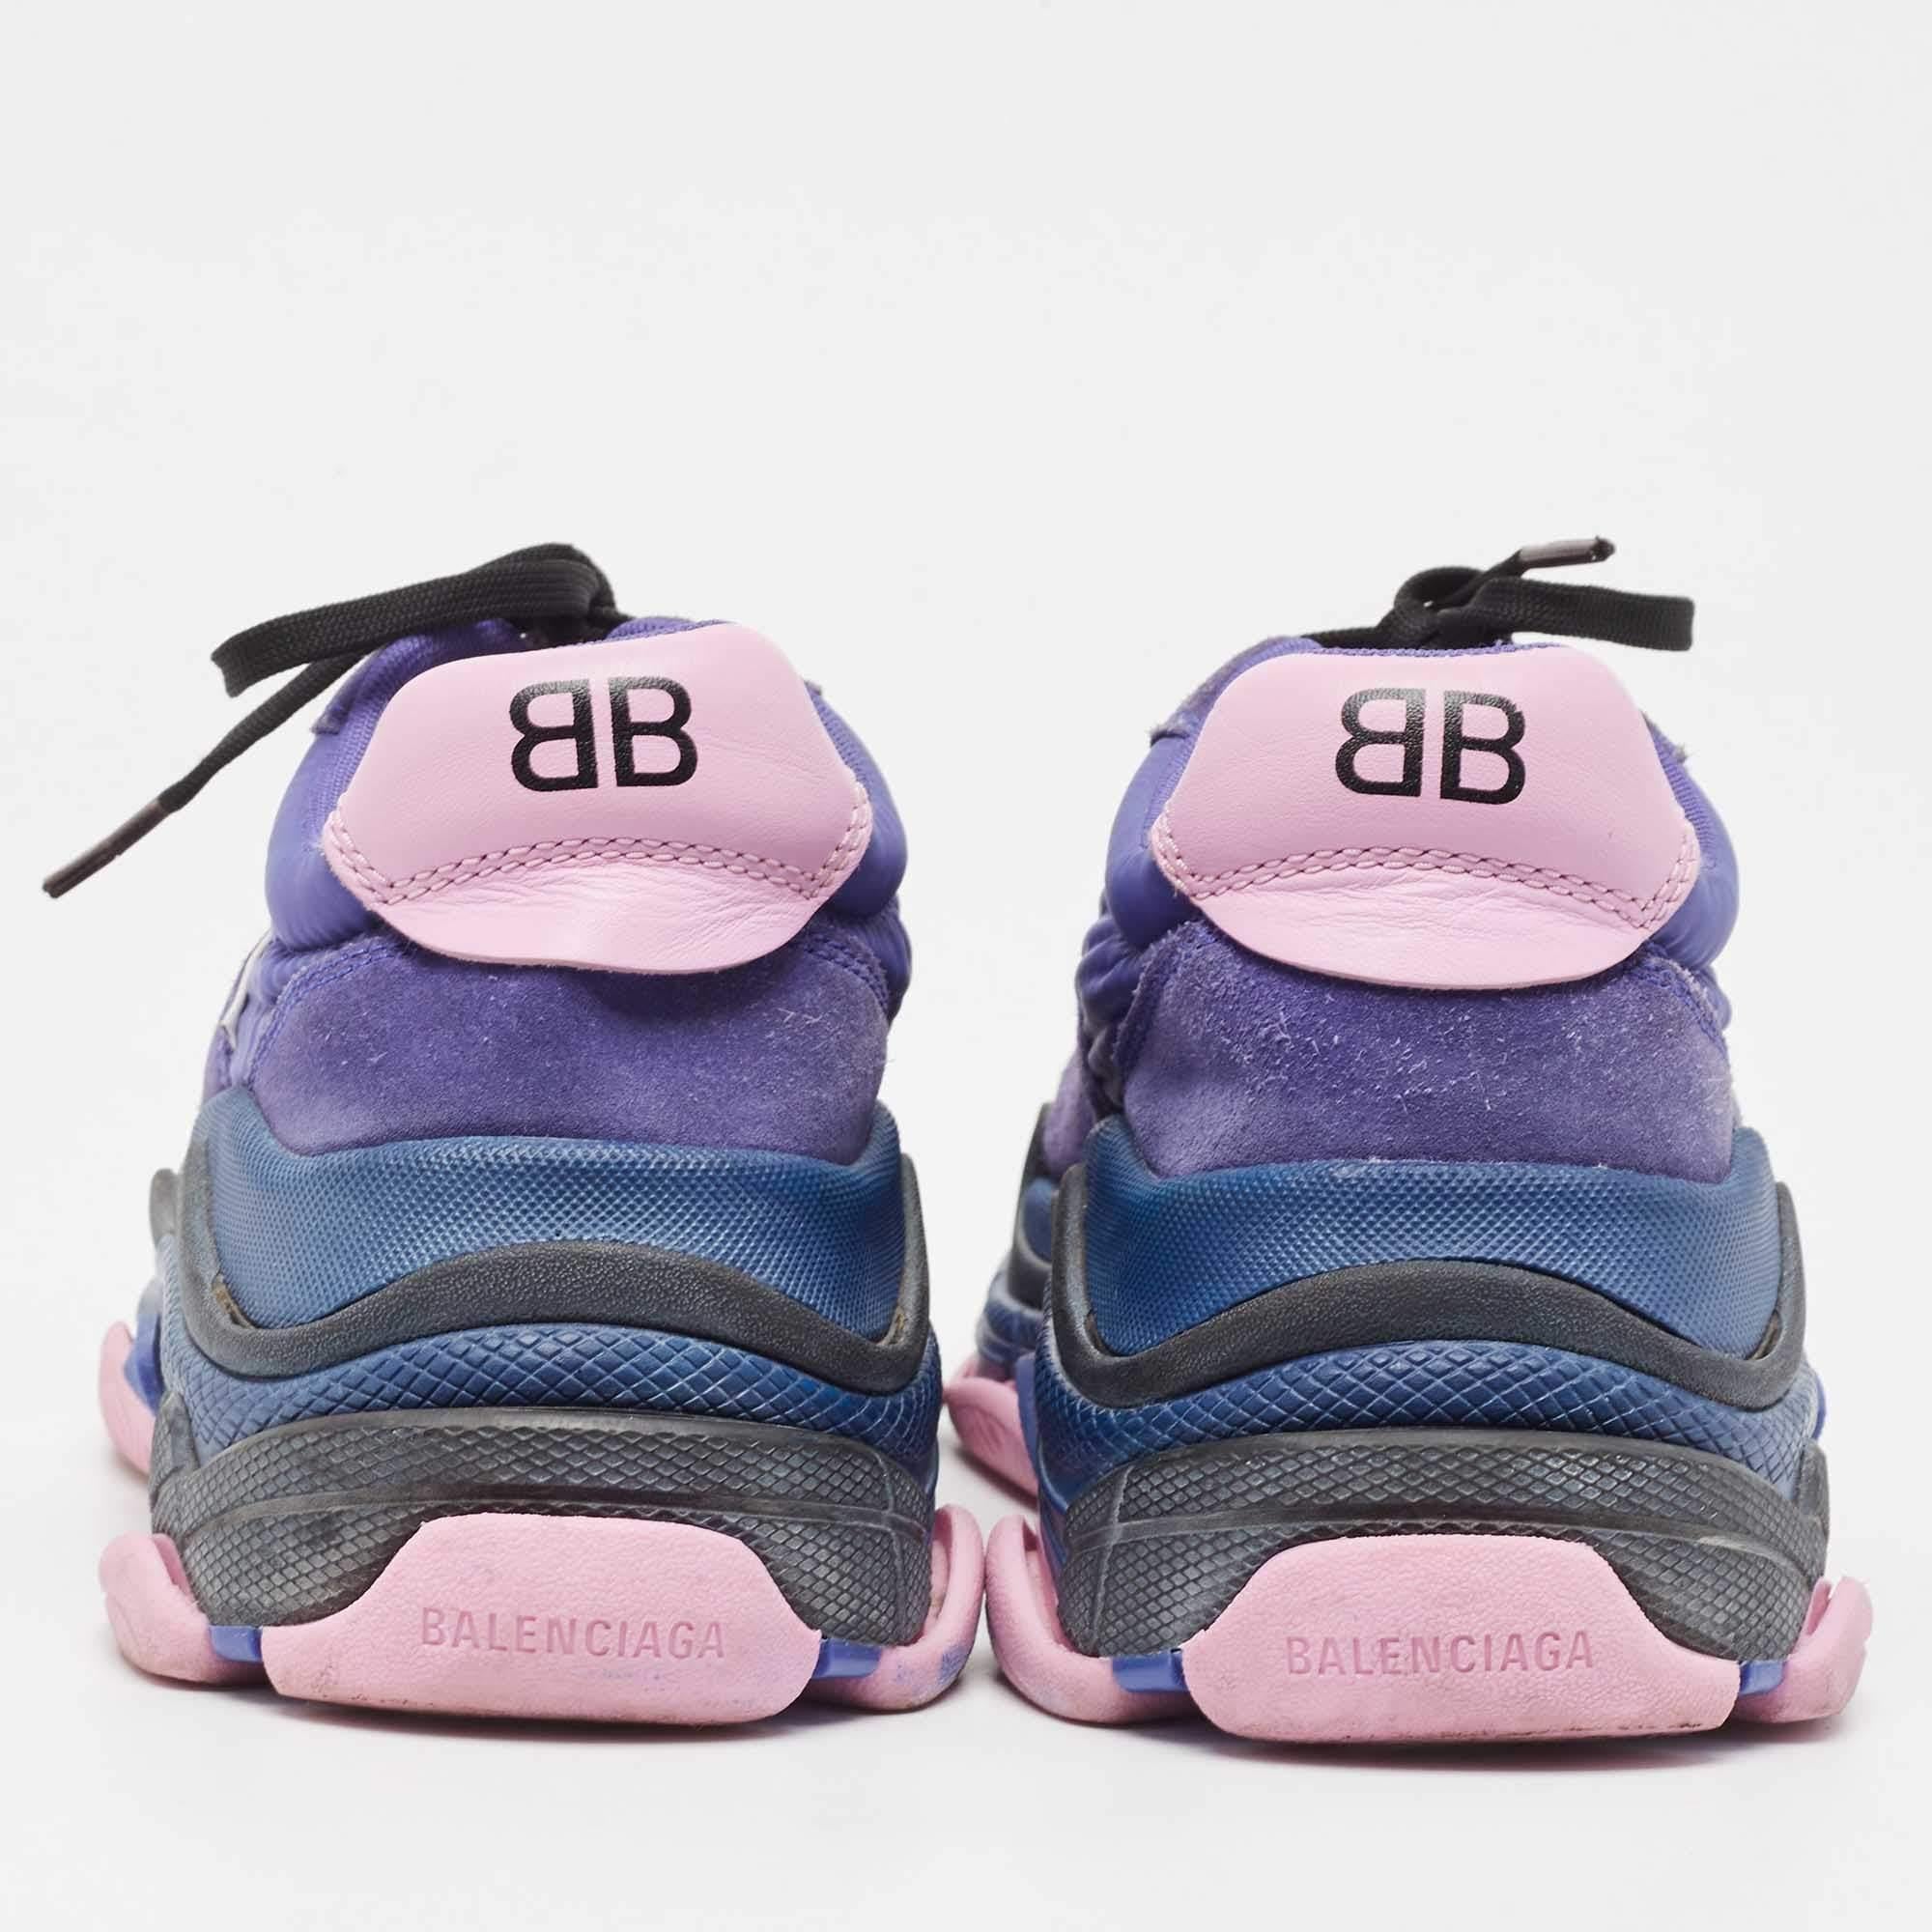 Balenciaga Purple Neoprene And Suede Triple -S Sneakers Size 40 For Sale 1